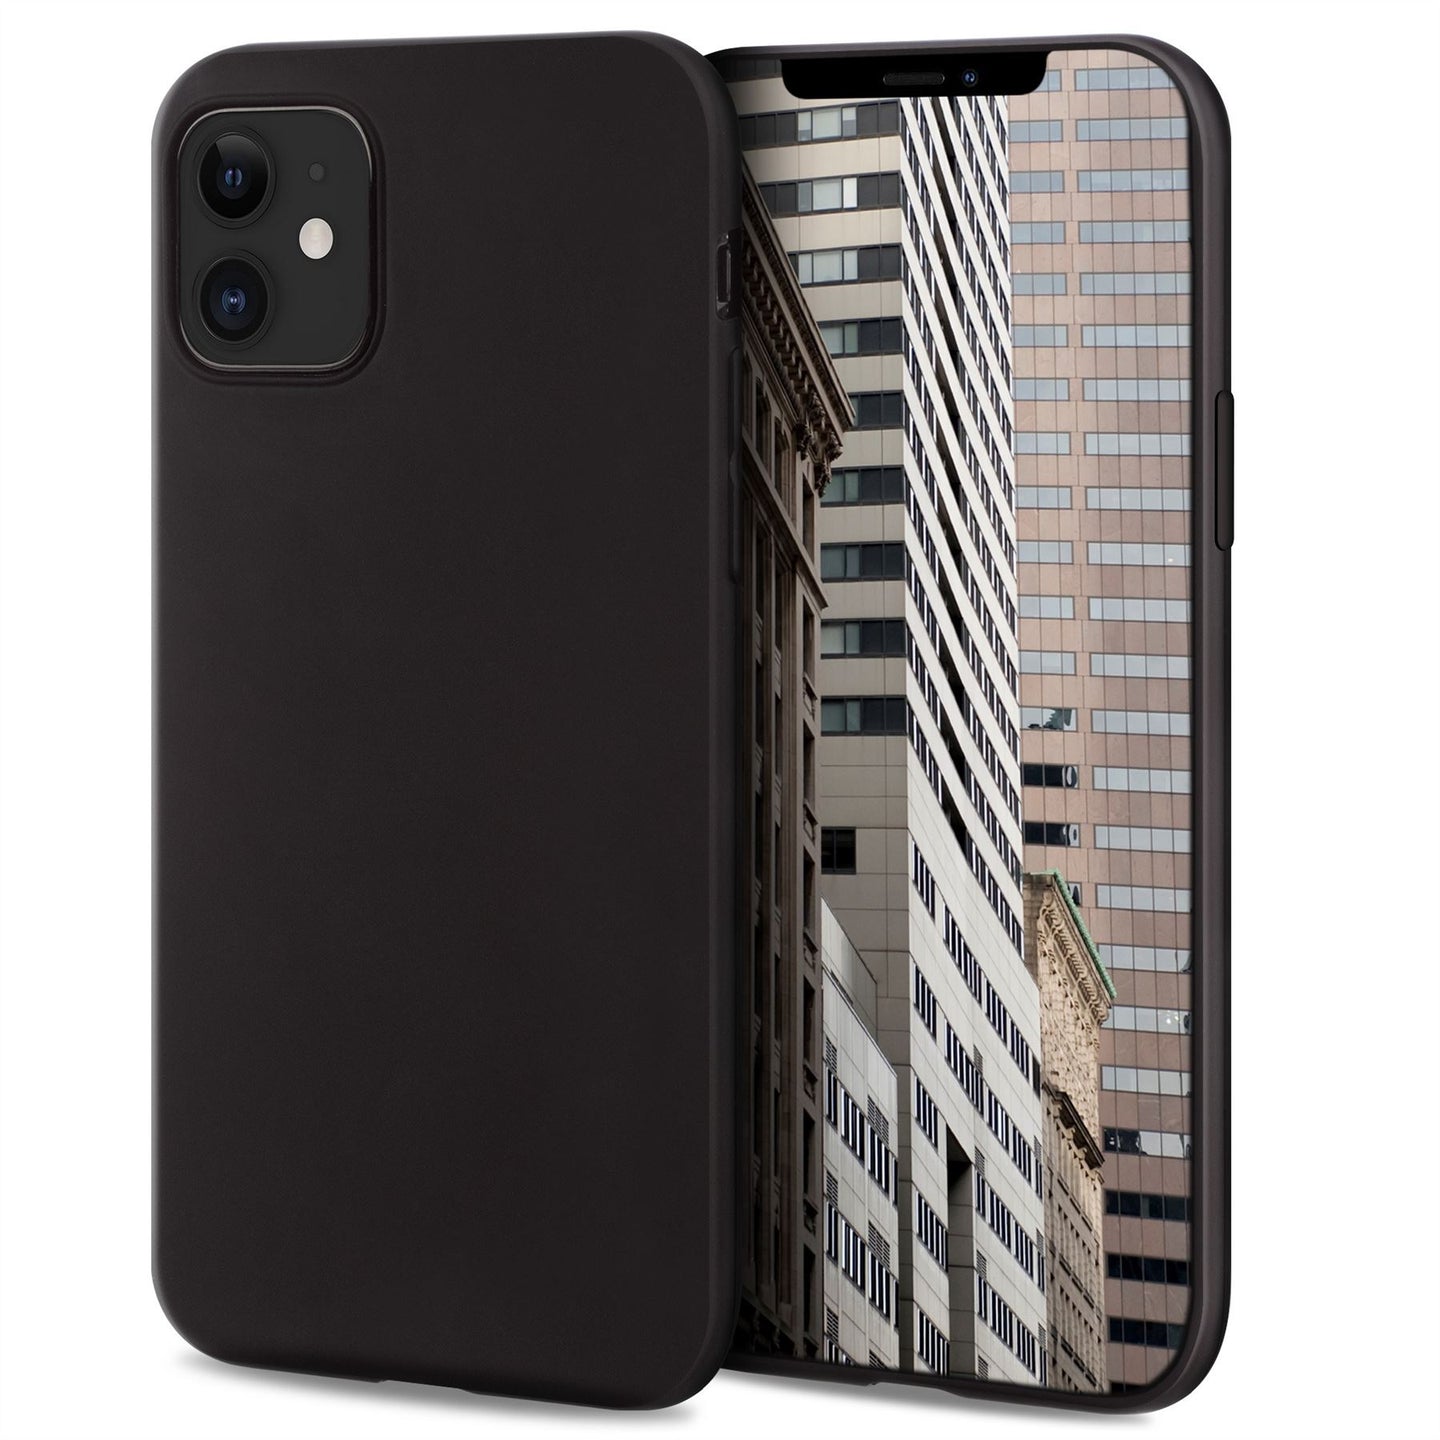 Moozy Lifestyle. Designed for iPhone 12 mini Case, Black - Liquid Silicone Cover with Matte Finish and Soft Microfiber Lining